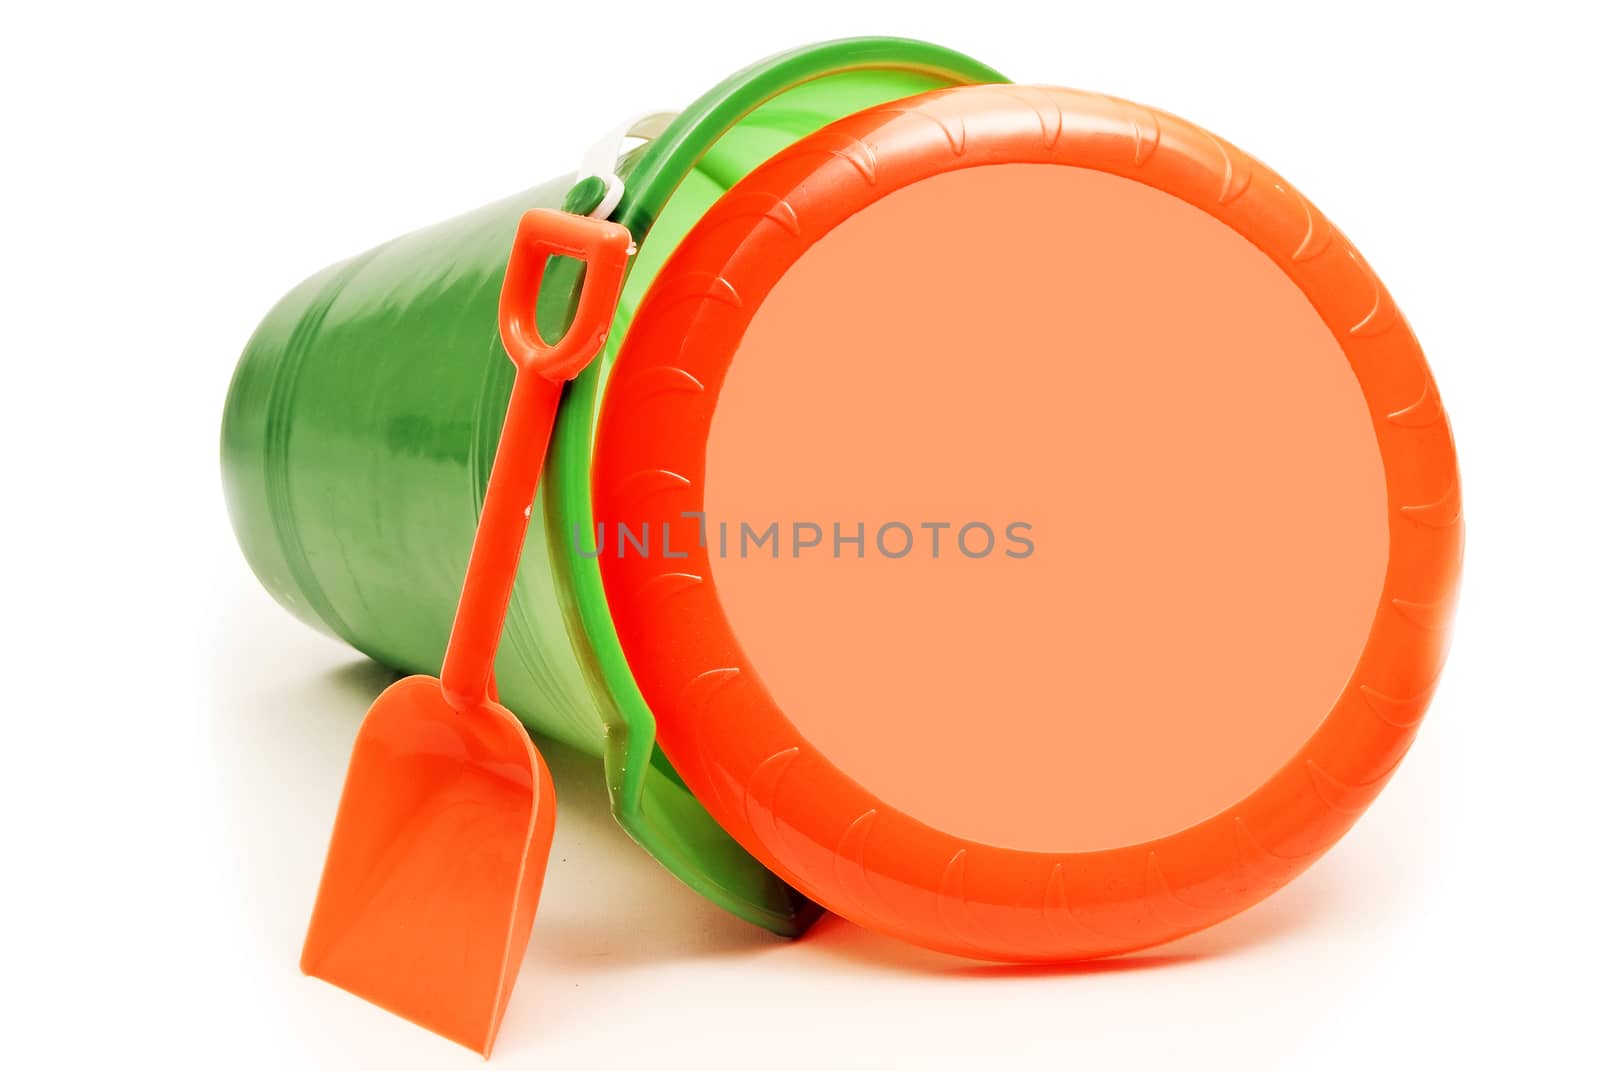 Beach Toy Pail With Frisbee by stockbuster1